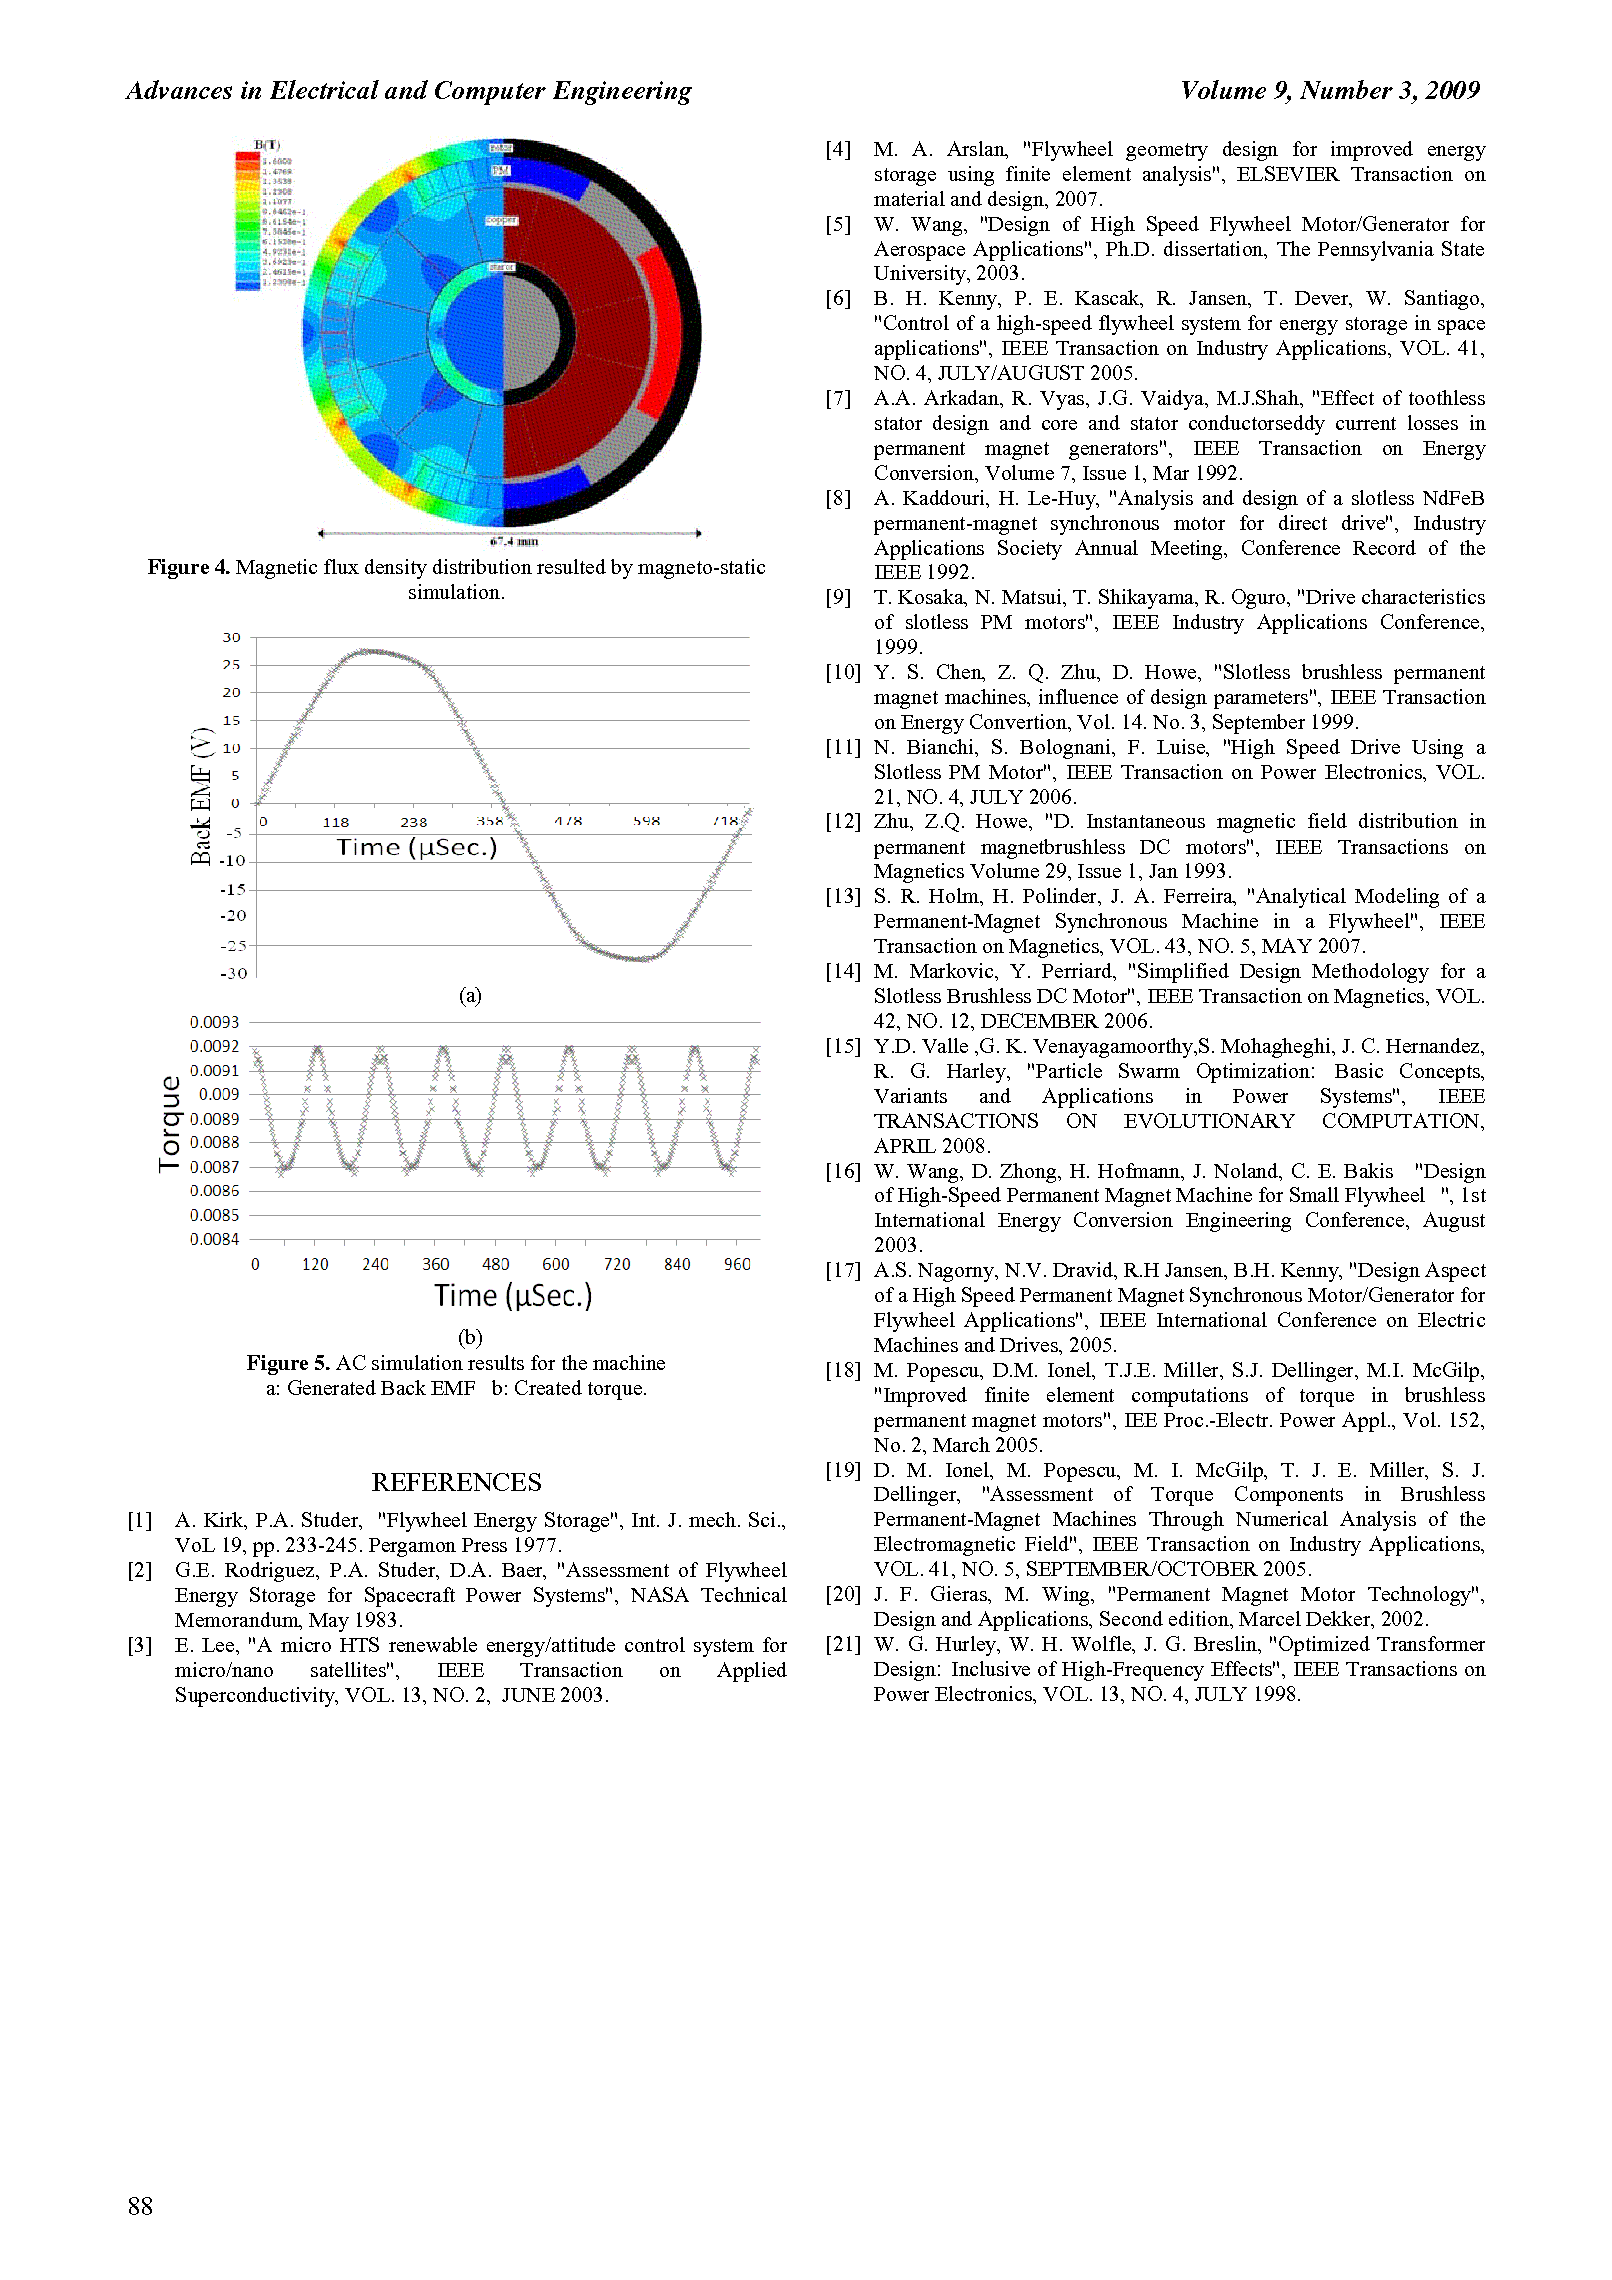 PDF Quickview for paper with DOI:10.4316/AECE.2009.03015